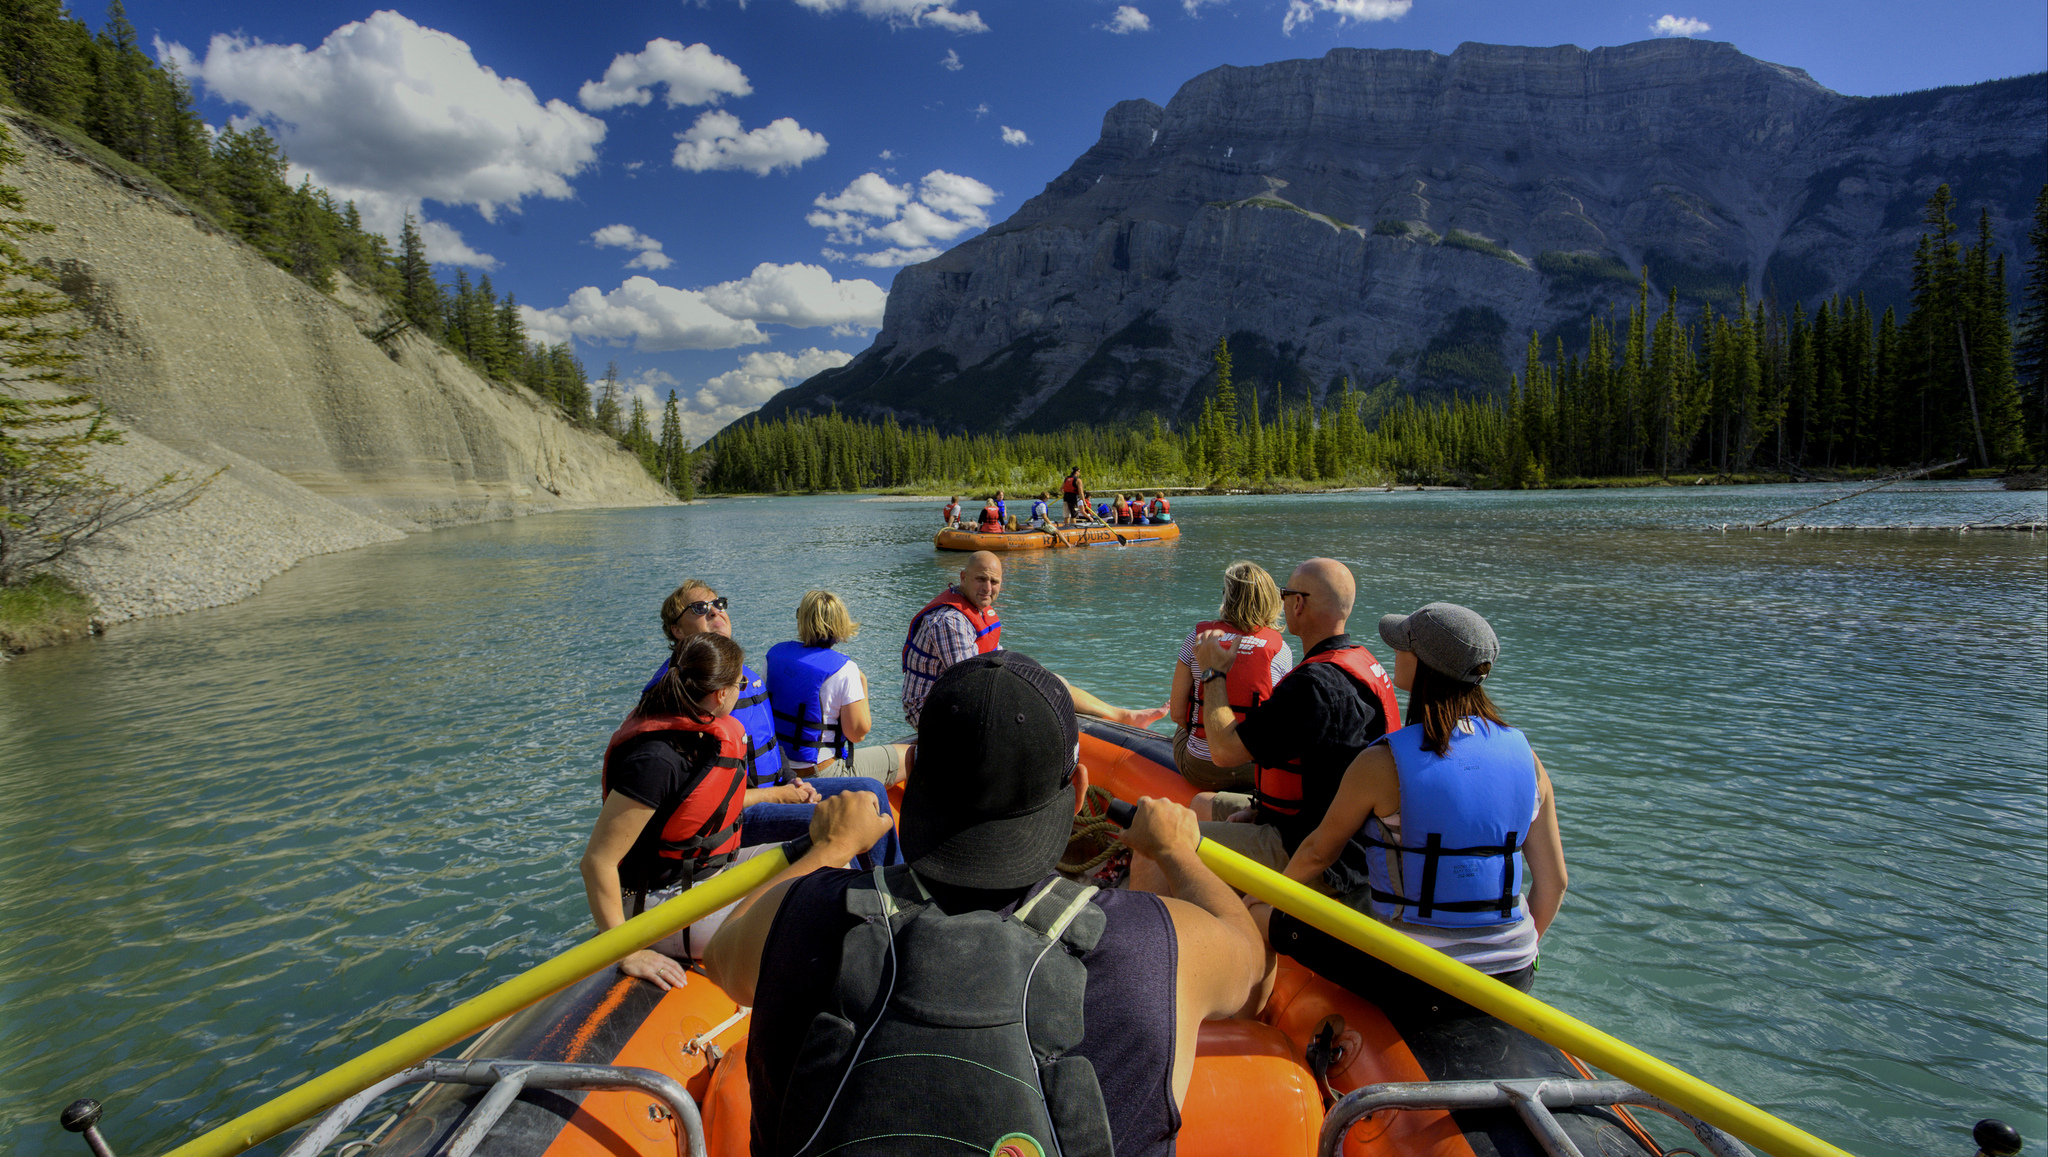 New Support to Start a Tourism Business in Alberta